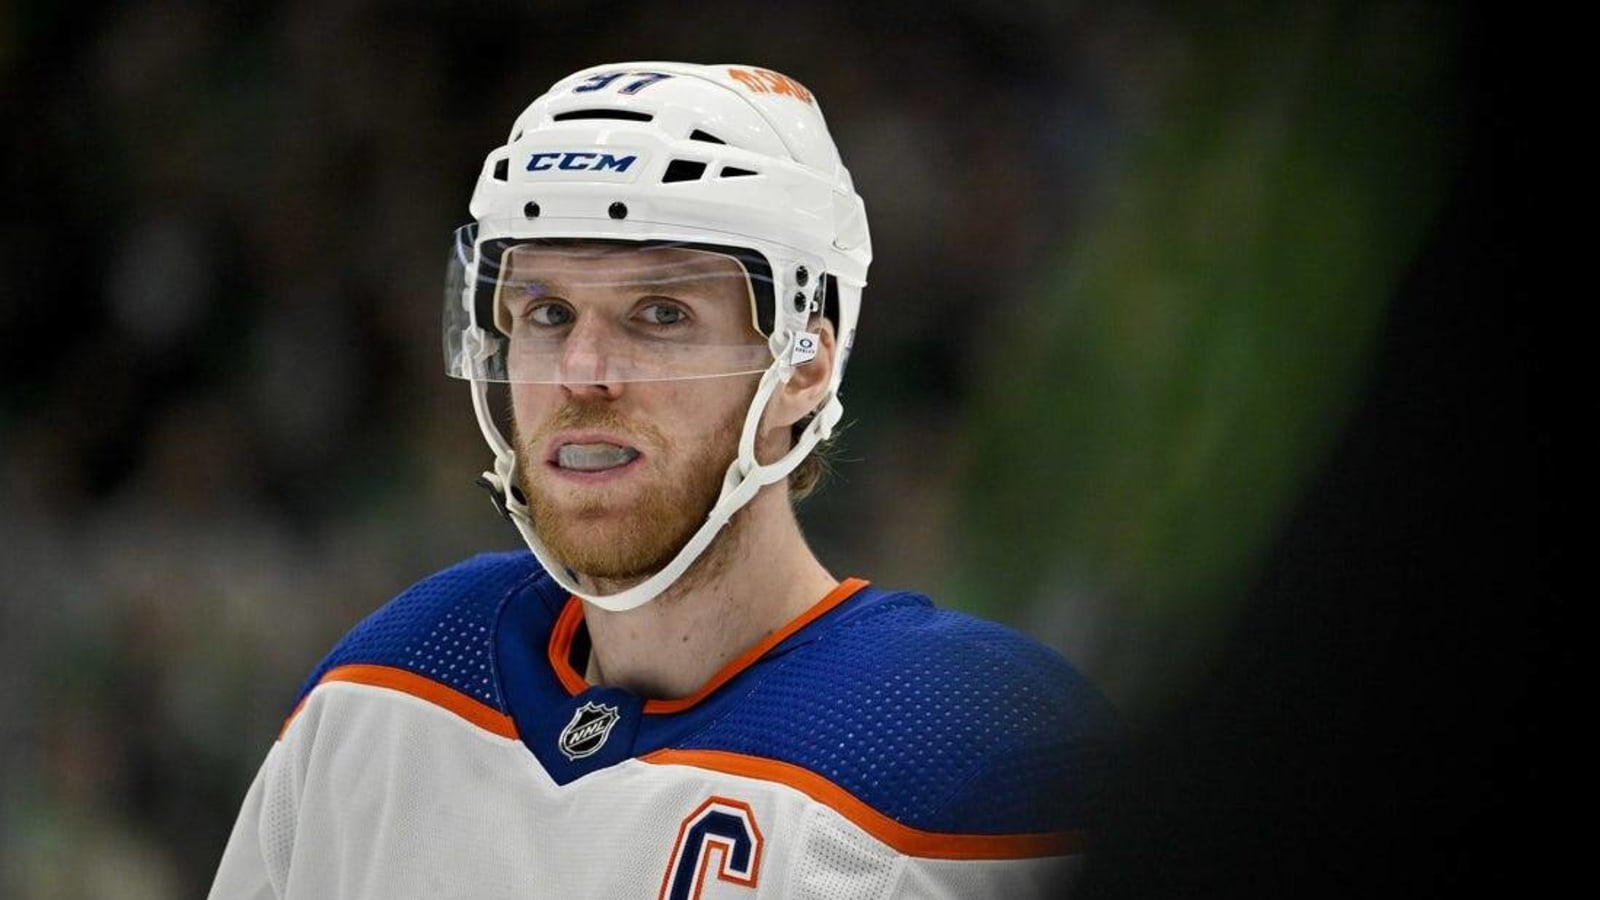 Oilers star Connor McDavid to sit out vs. Canucks